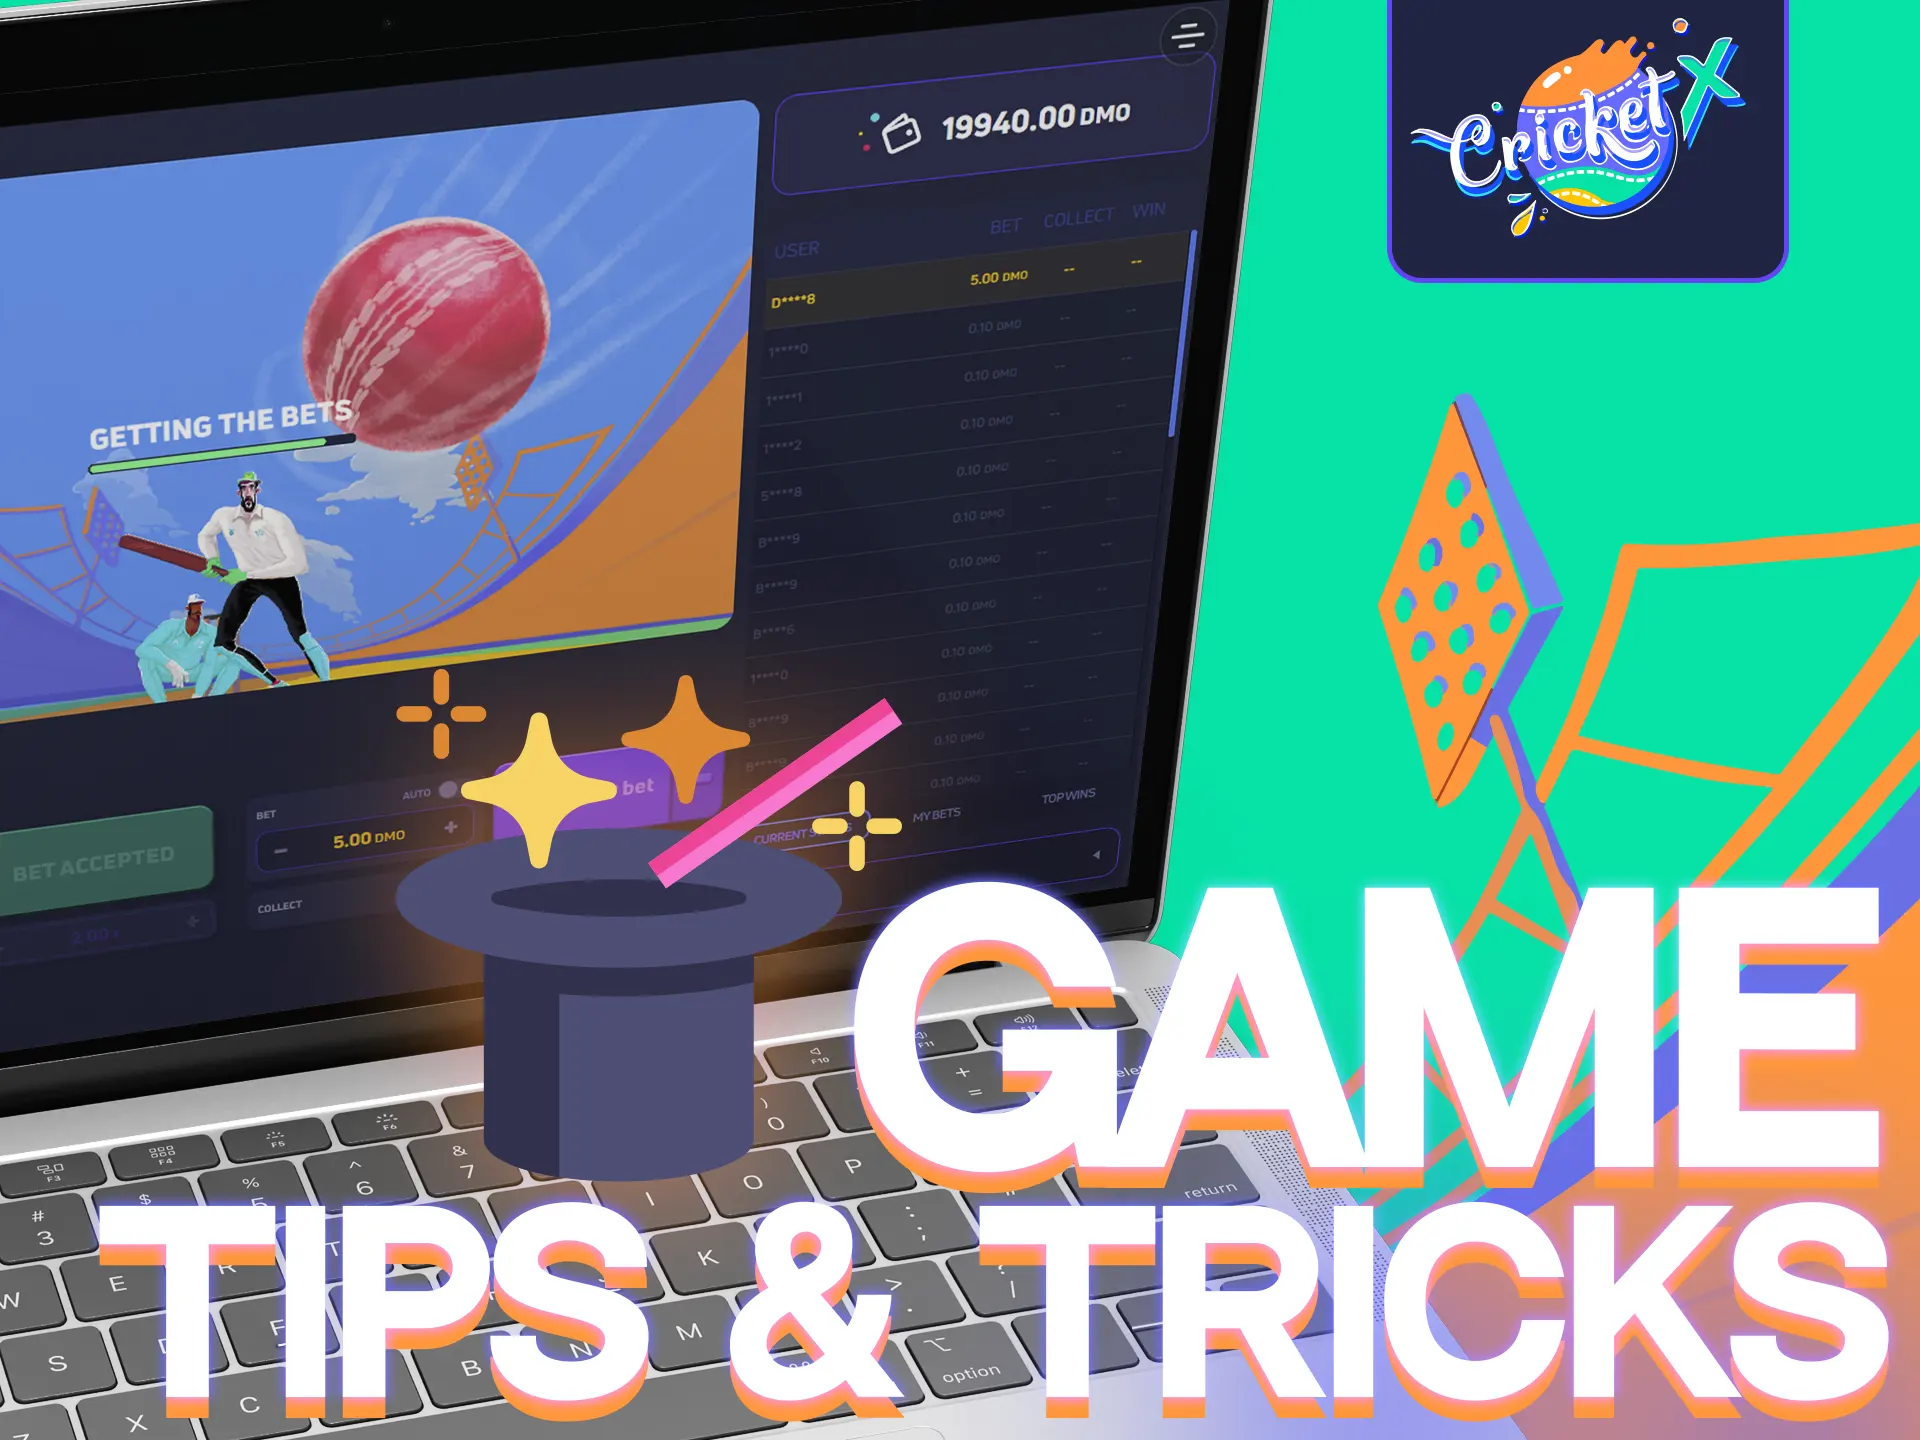 Check out some helpful tips for playing Cricket-X.